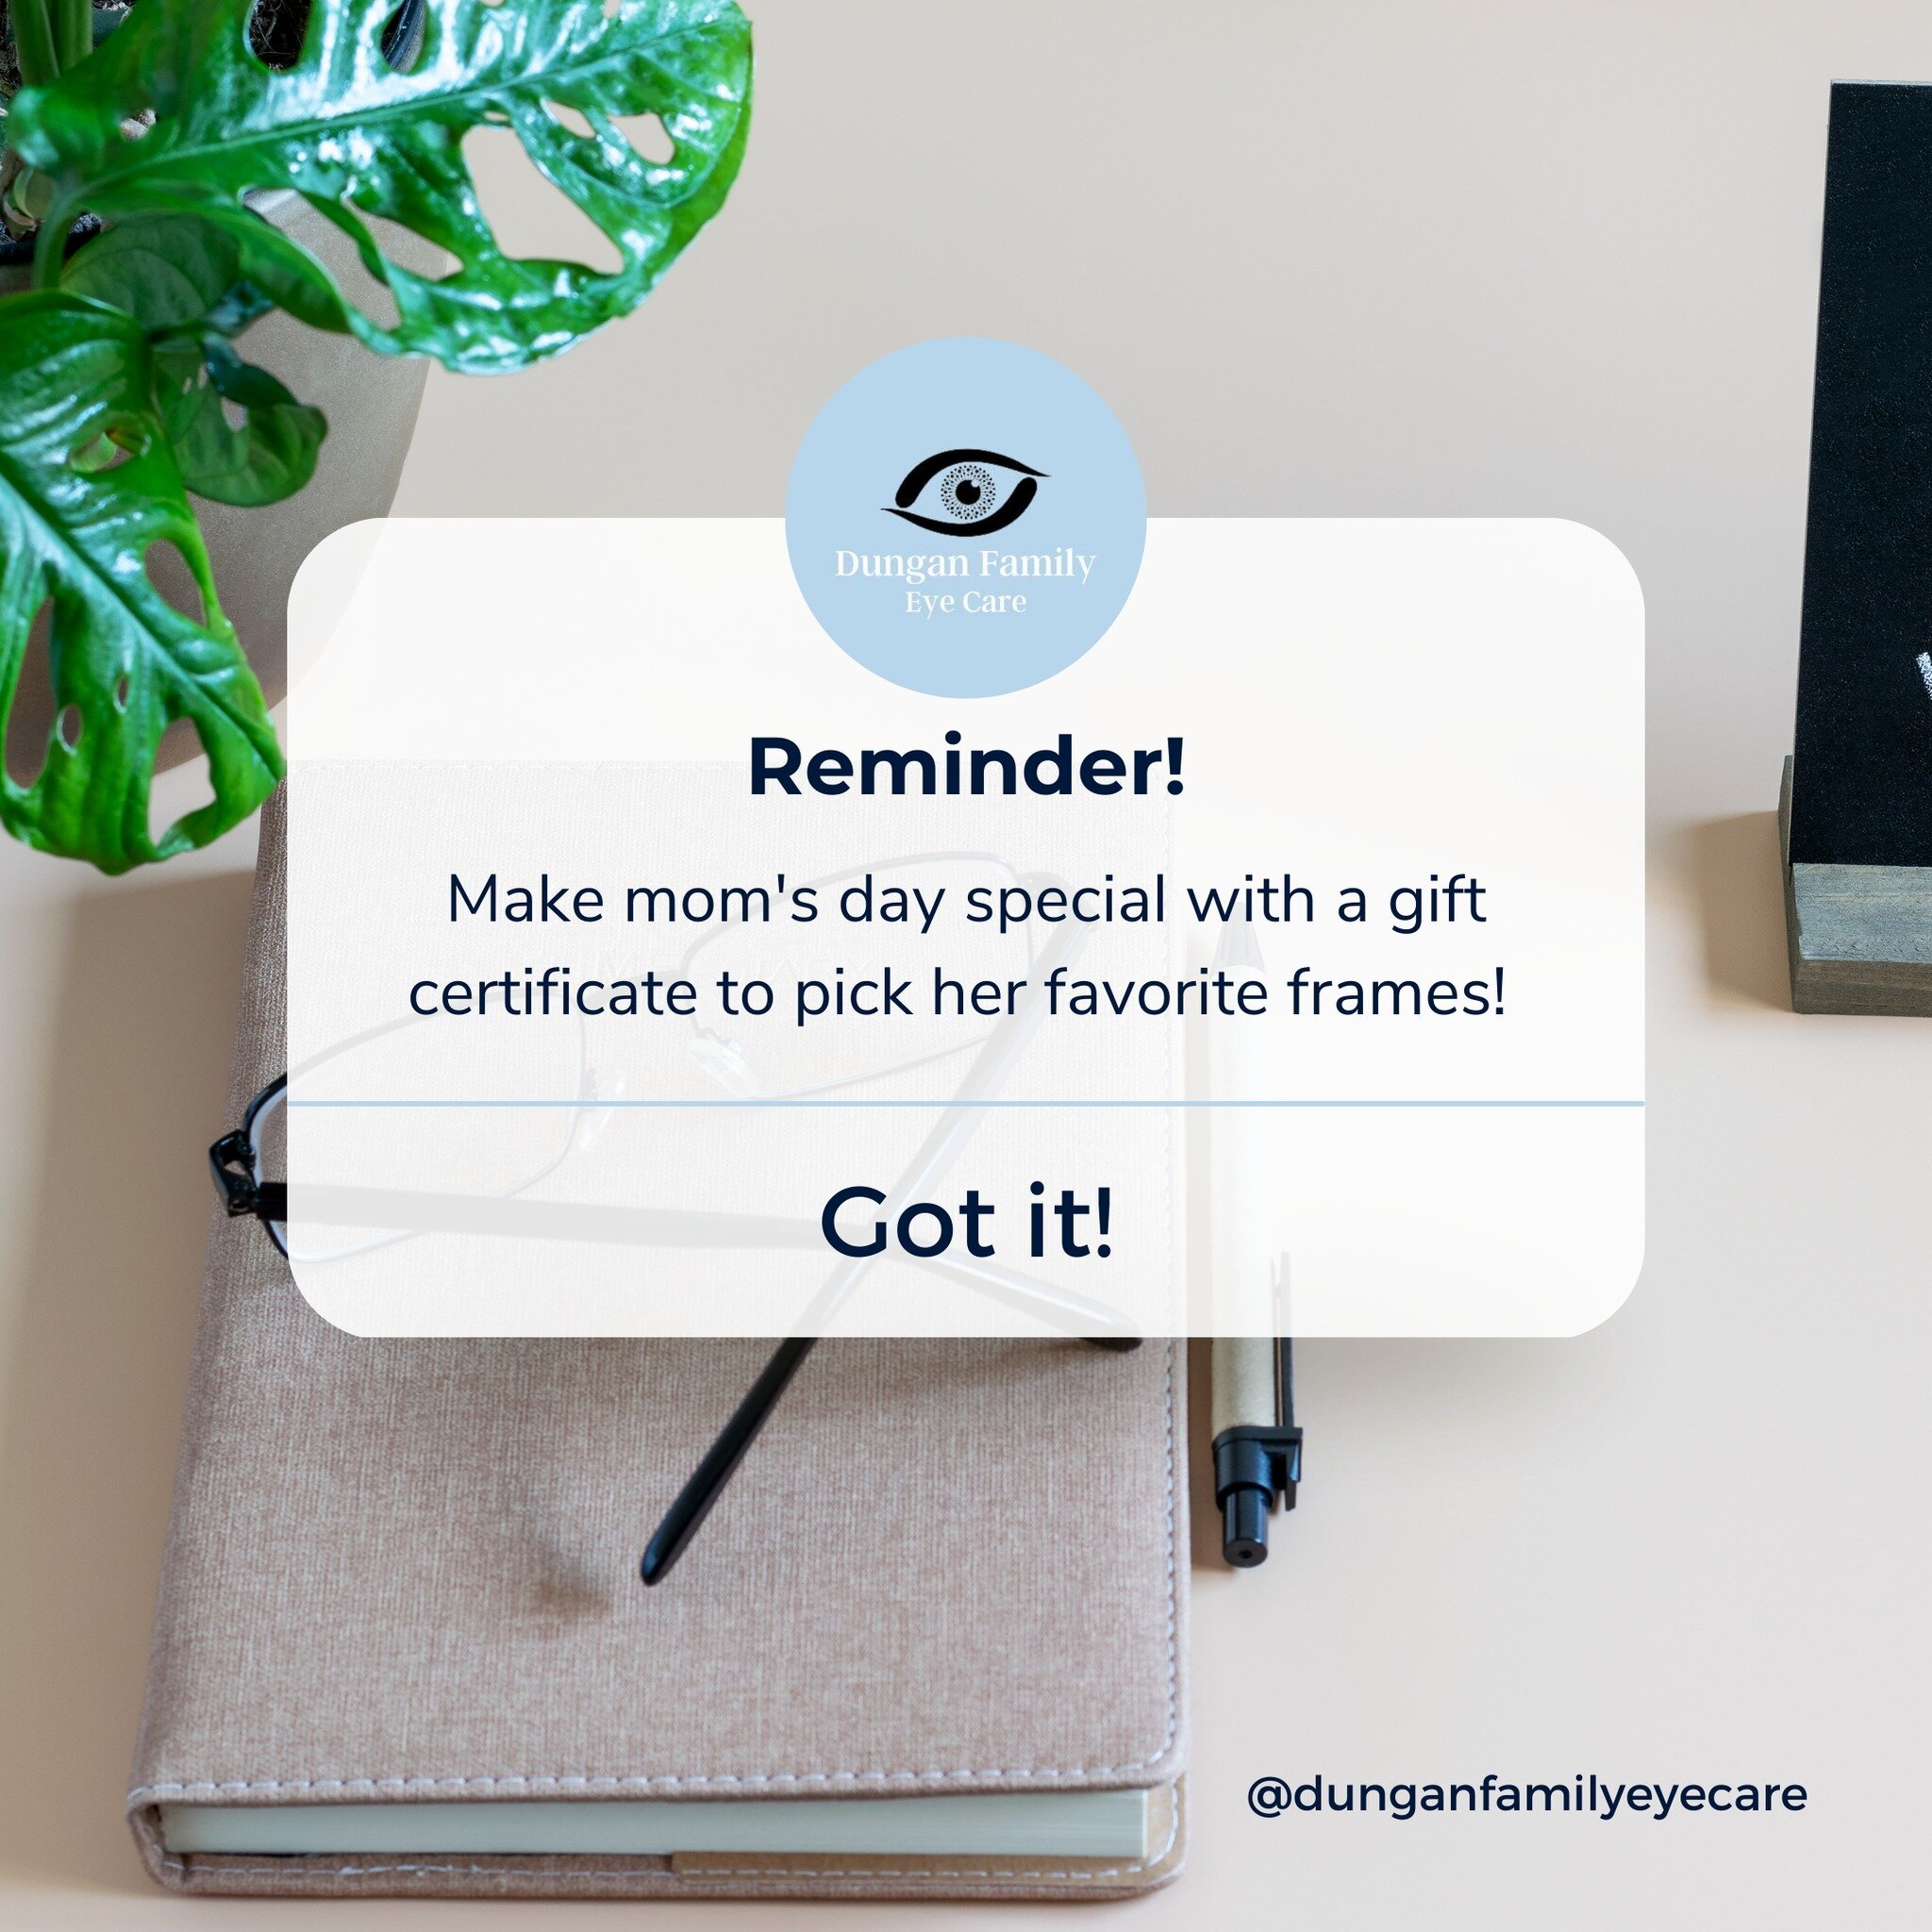 🎁 This Mother's Day, pamper Mom with the gift of style and clear vision! Give her a gift certificate to Dungan Family Eye Care, and let her choose the fashionable frames she's always wanted. 👓💐

Simply call and pay ahead of time, and we'll have a 